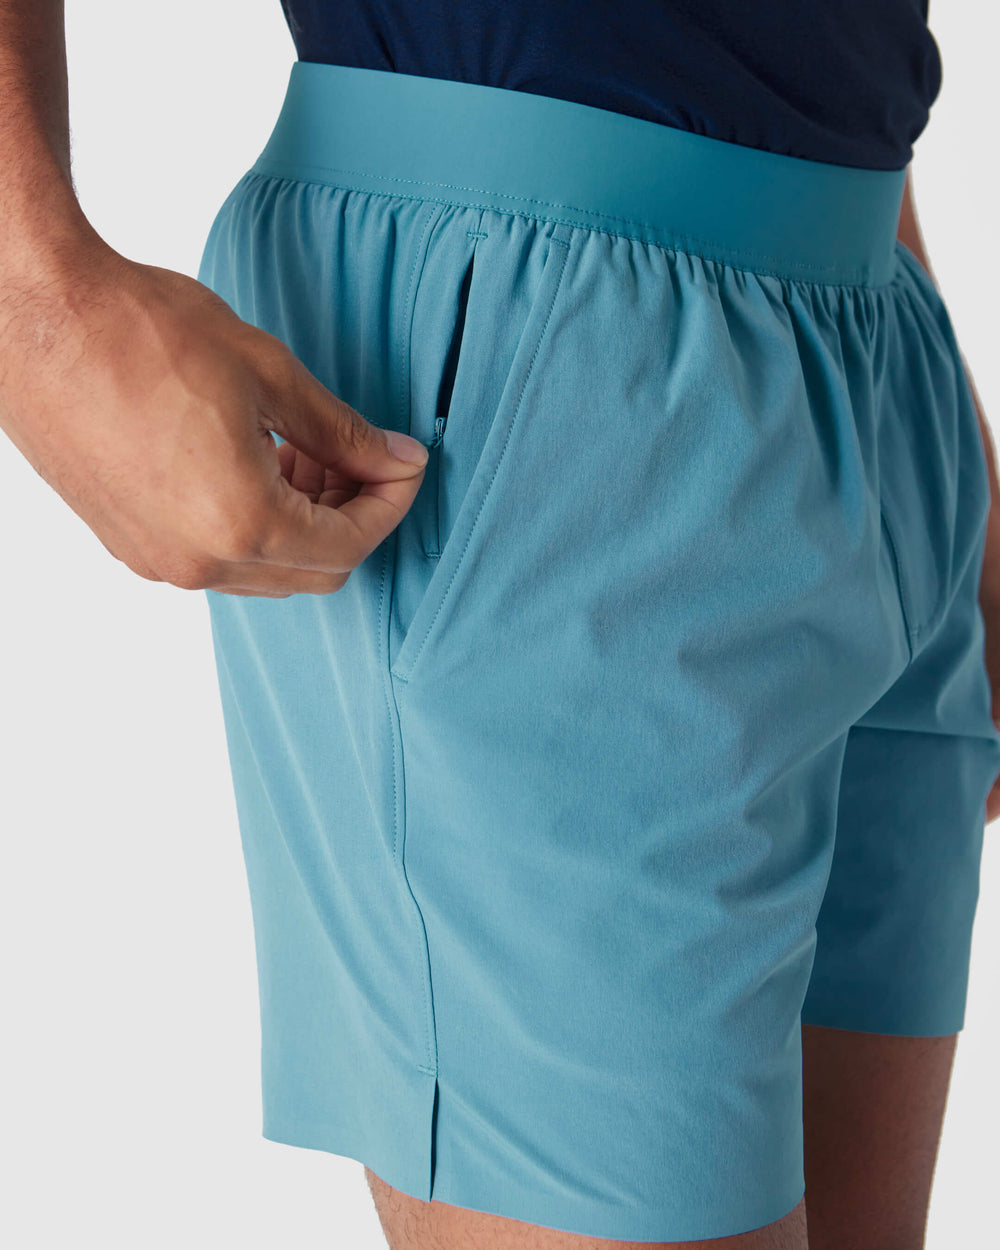 Voyager 7" 2-in-1 Training Shorts